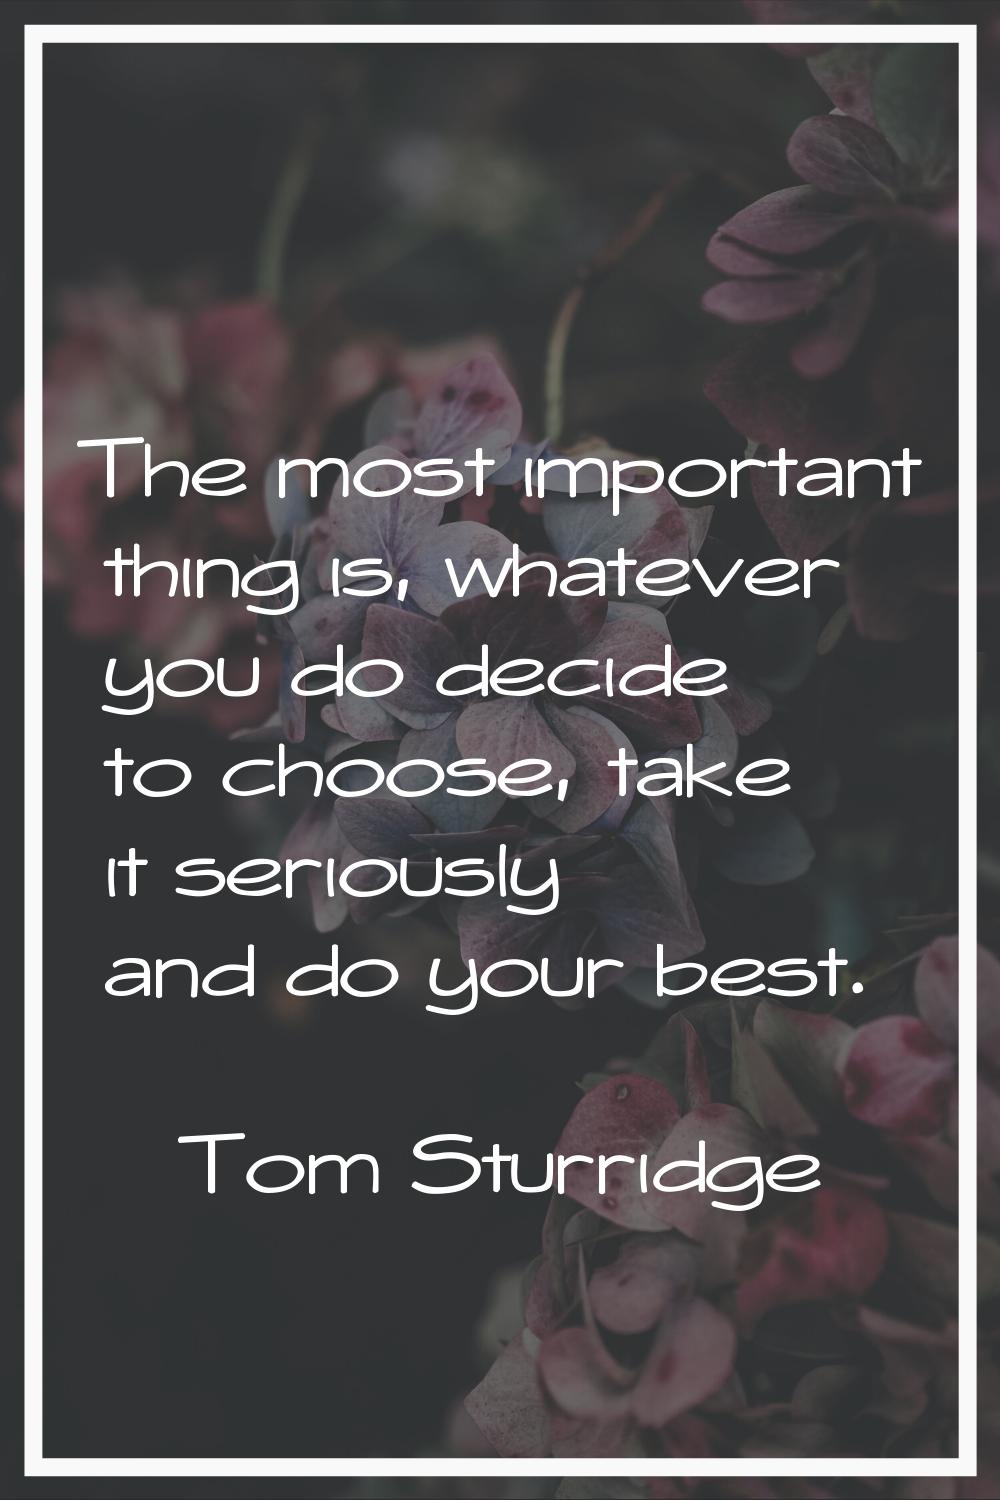 The most important thing is, whatever you do decide to choose, take it seriously and do your best.